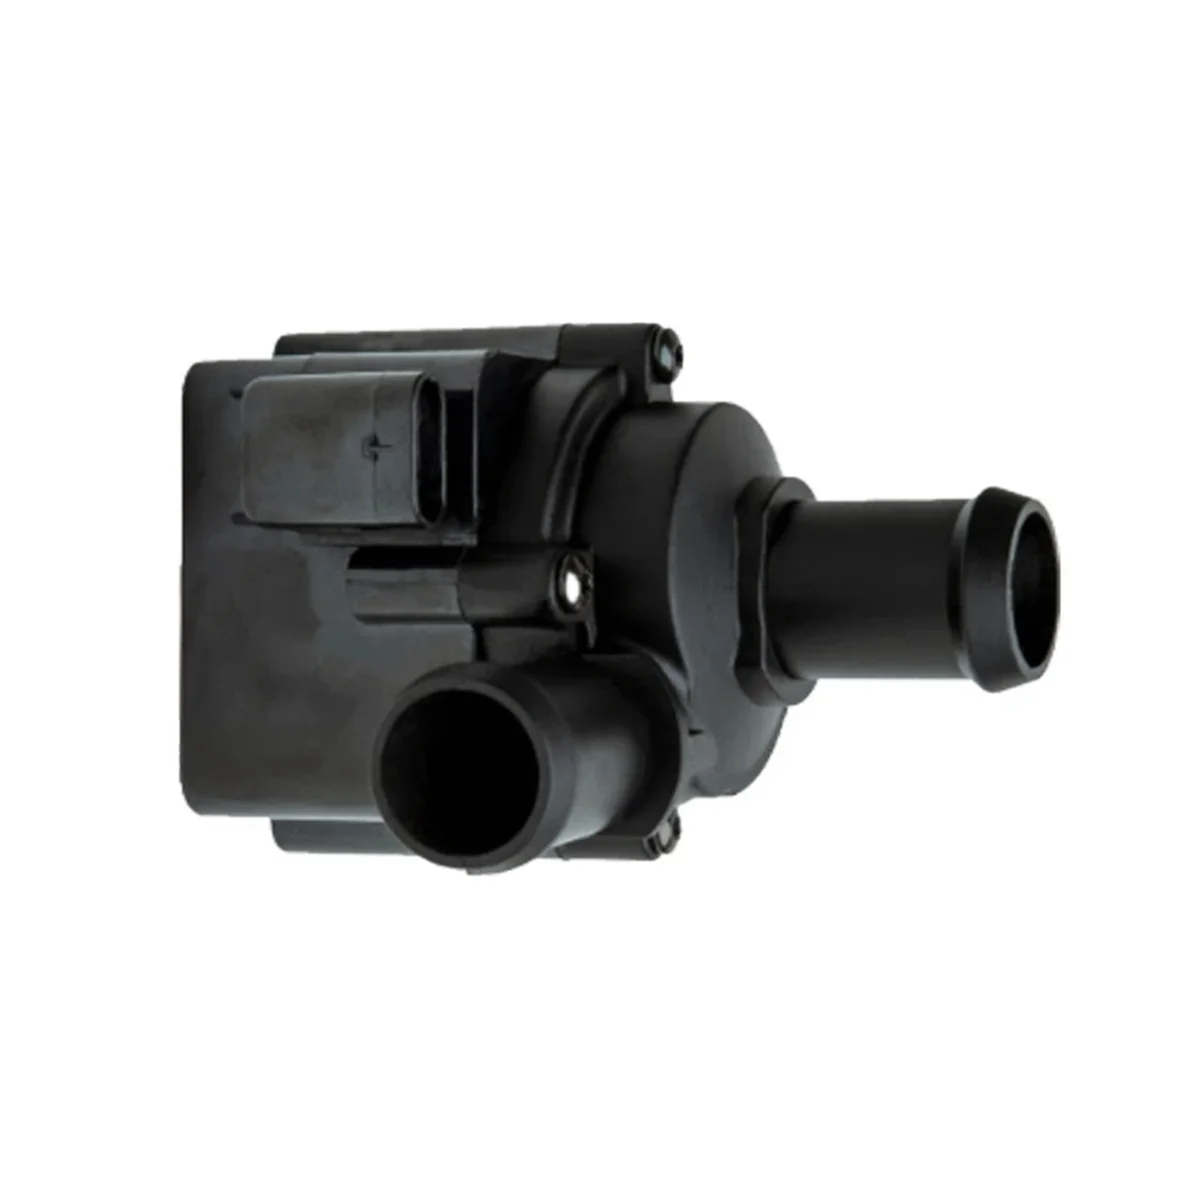 

06H121601N Additional Water Pump Auxiliary Water Pump Automobile for A4L A6L A4LQ8 A5 A7 S5 R8 Fidion